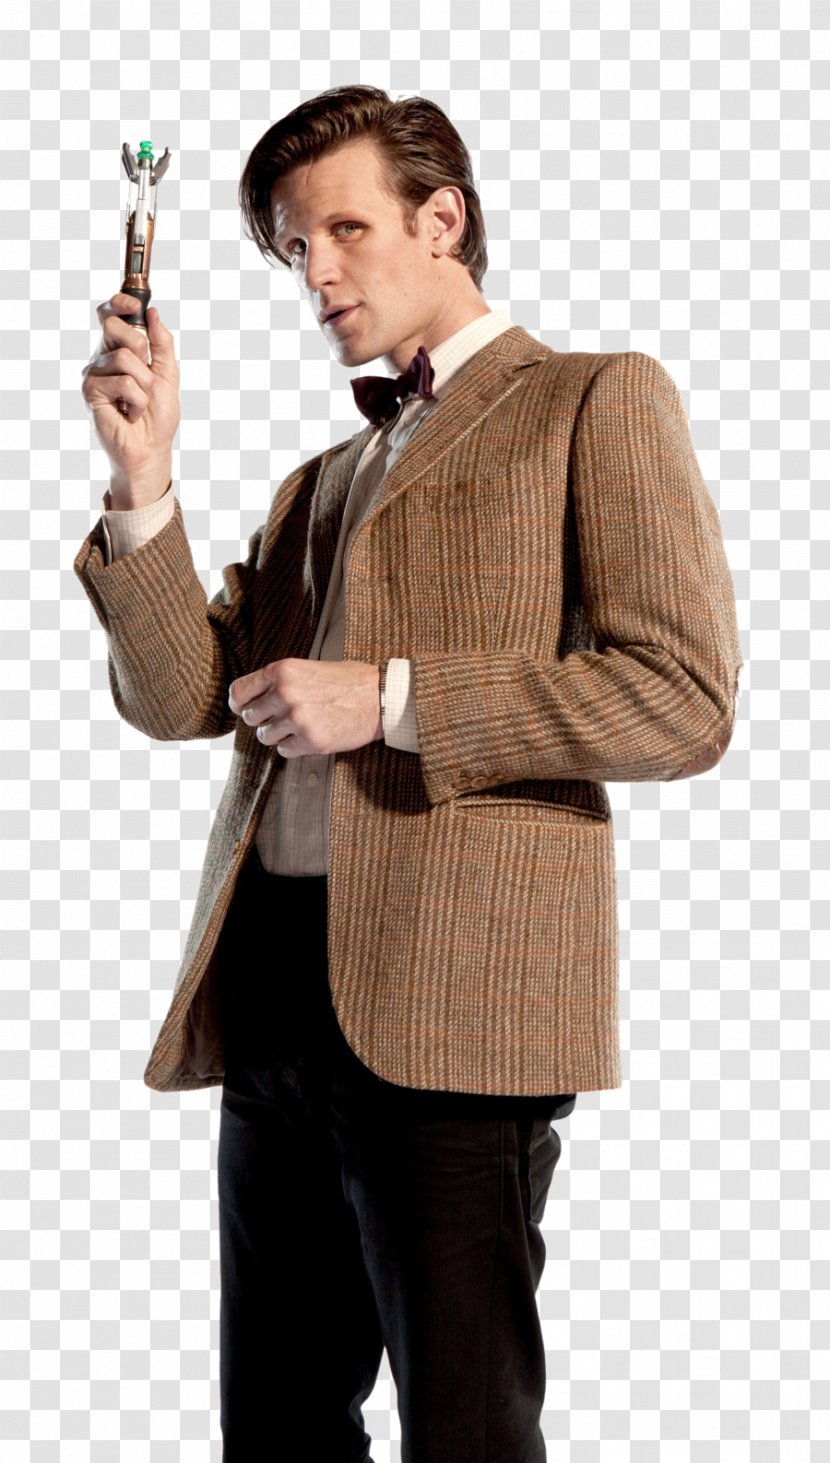 Jenna Coleman Eleventh Doctor Who Tenth - Gentleman - The Transparent Image Transparent PNG